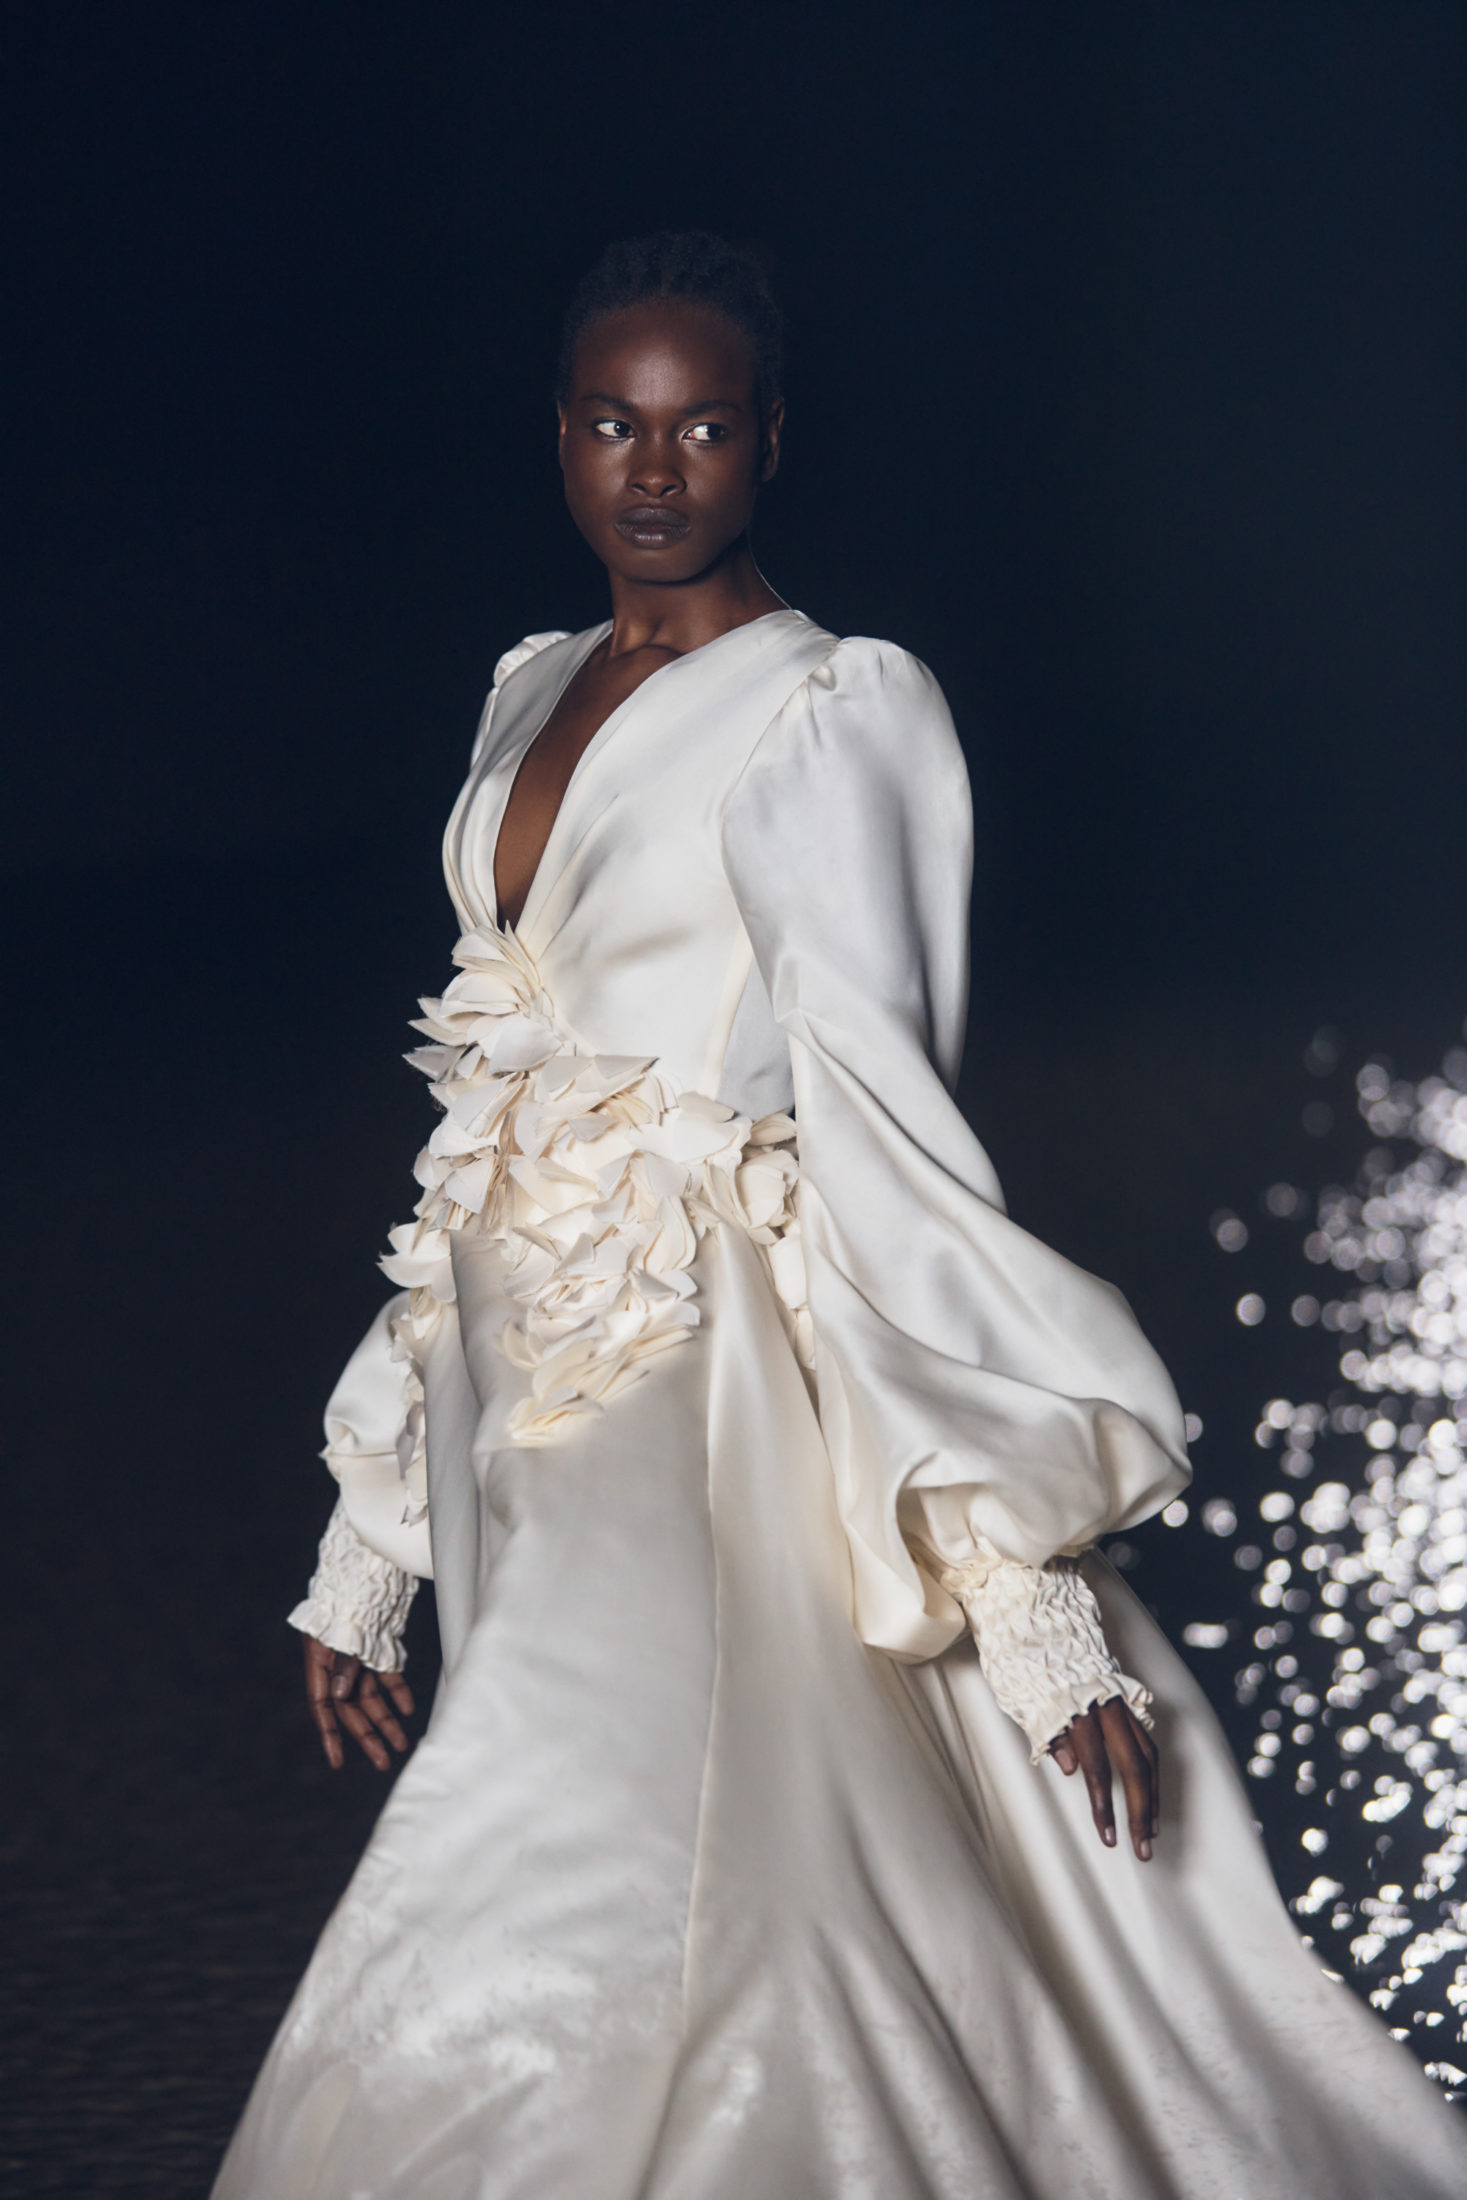 Murashka wedding gown with petal embroidery and ruched sleeve details. Featured on The Lane Fall 22 Bridal Week.